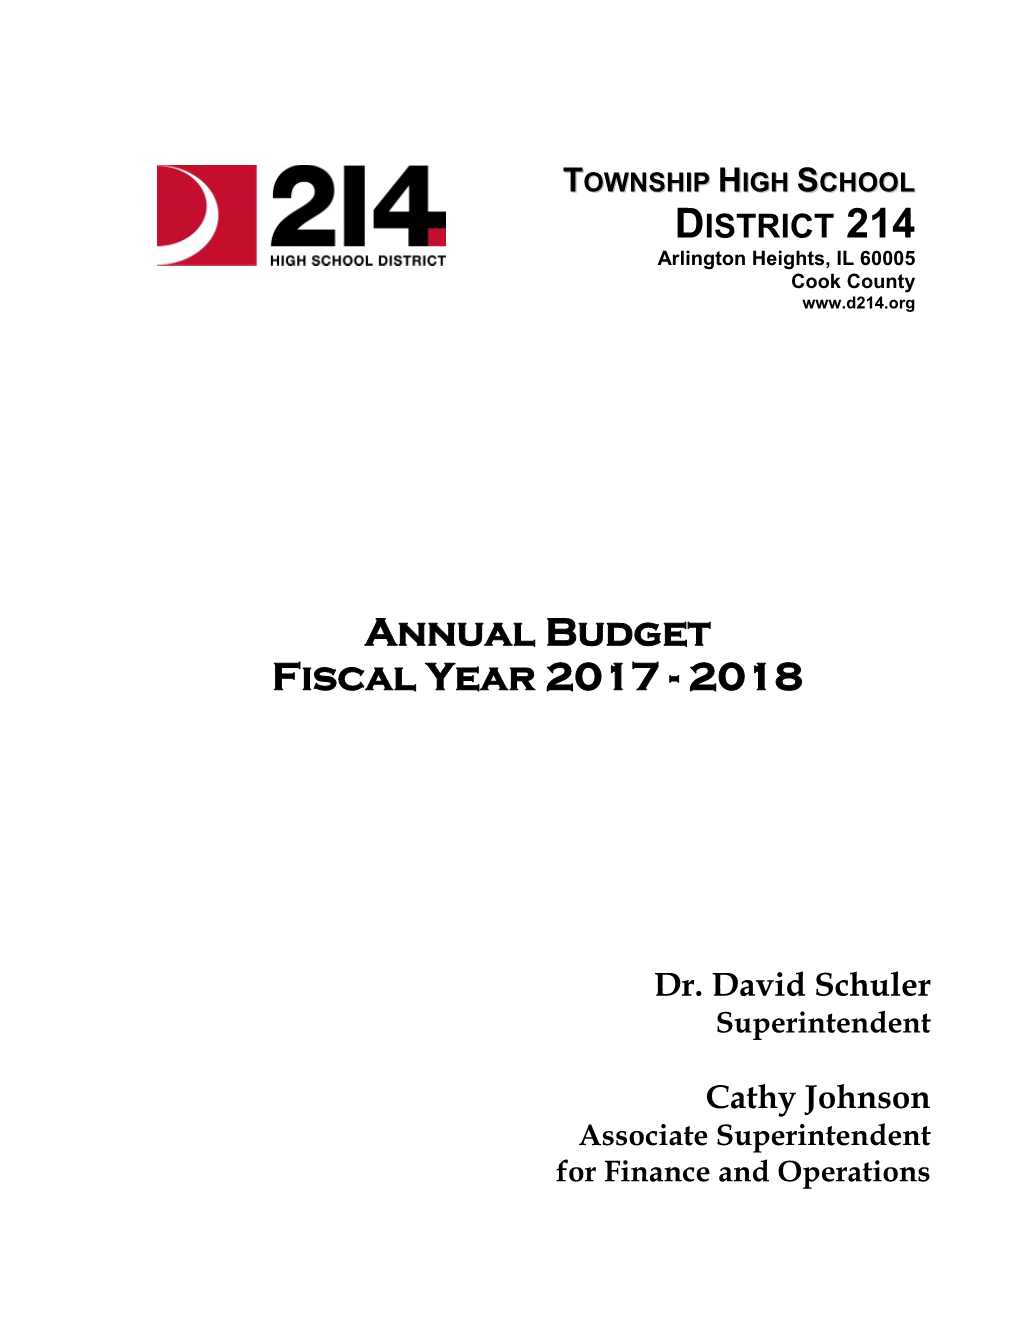 Annual Budget Fiscal Year 2017 - 2018